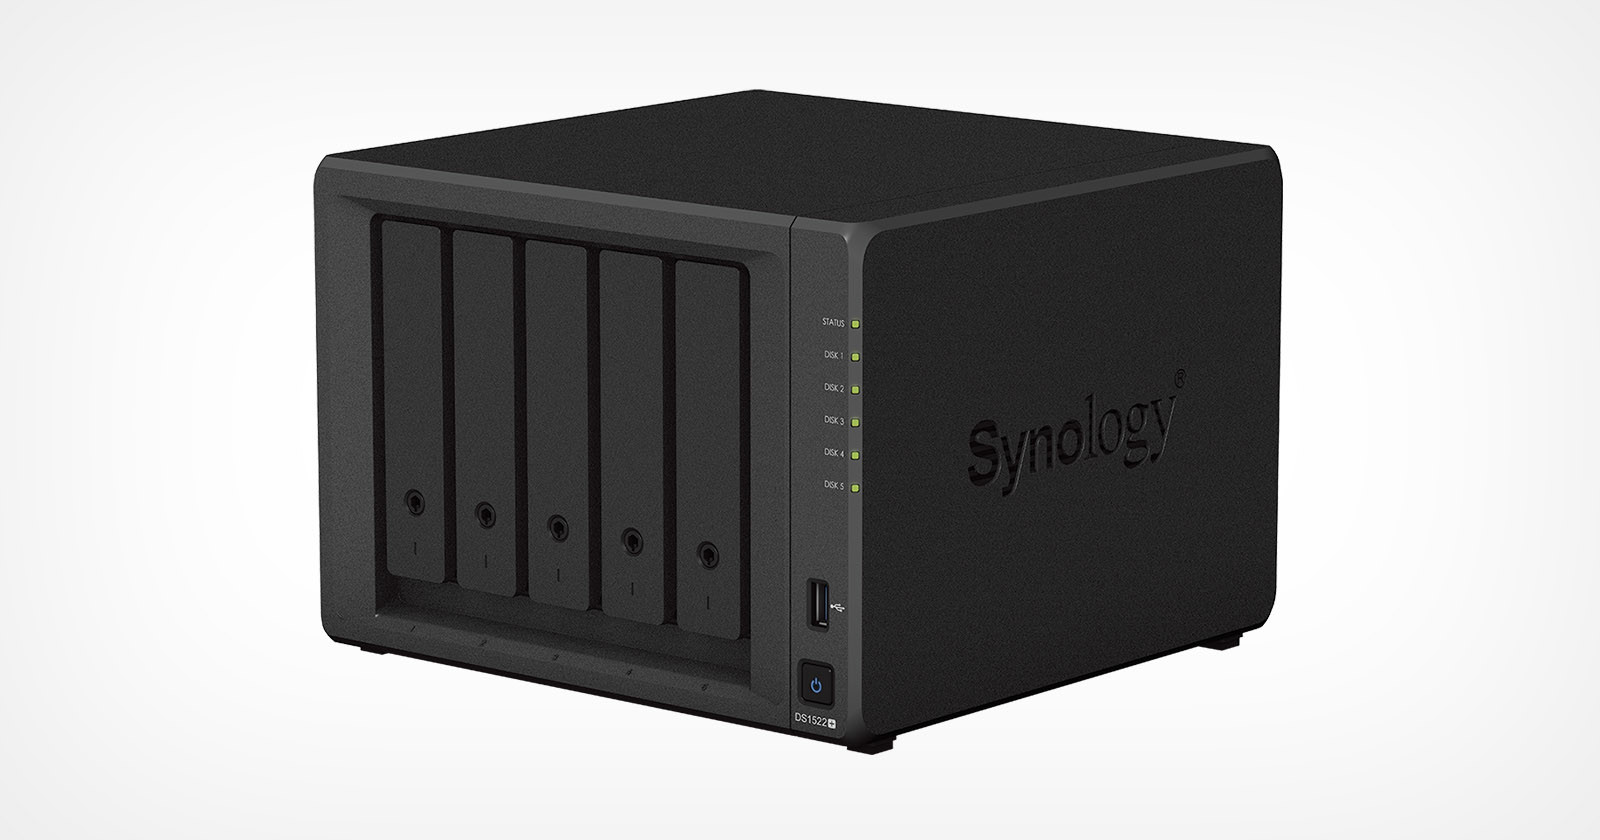 The Synology DS1522+ is a New Compact Desktop 5-Bay NAS